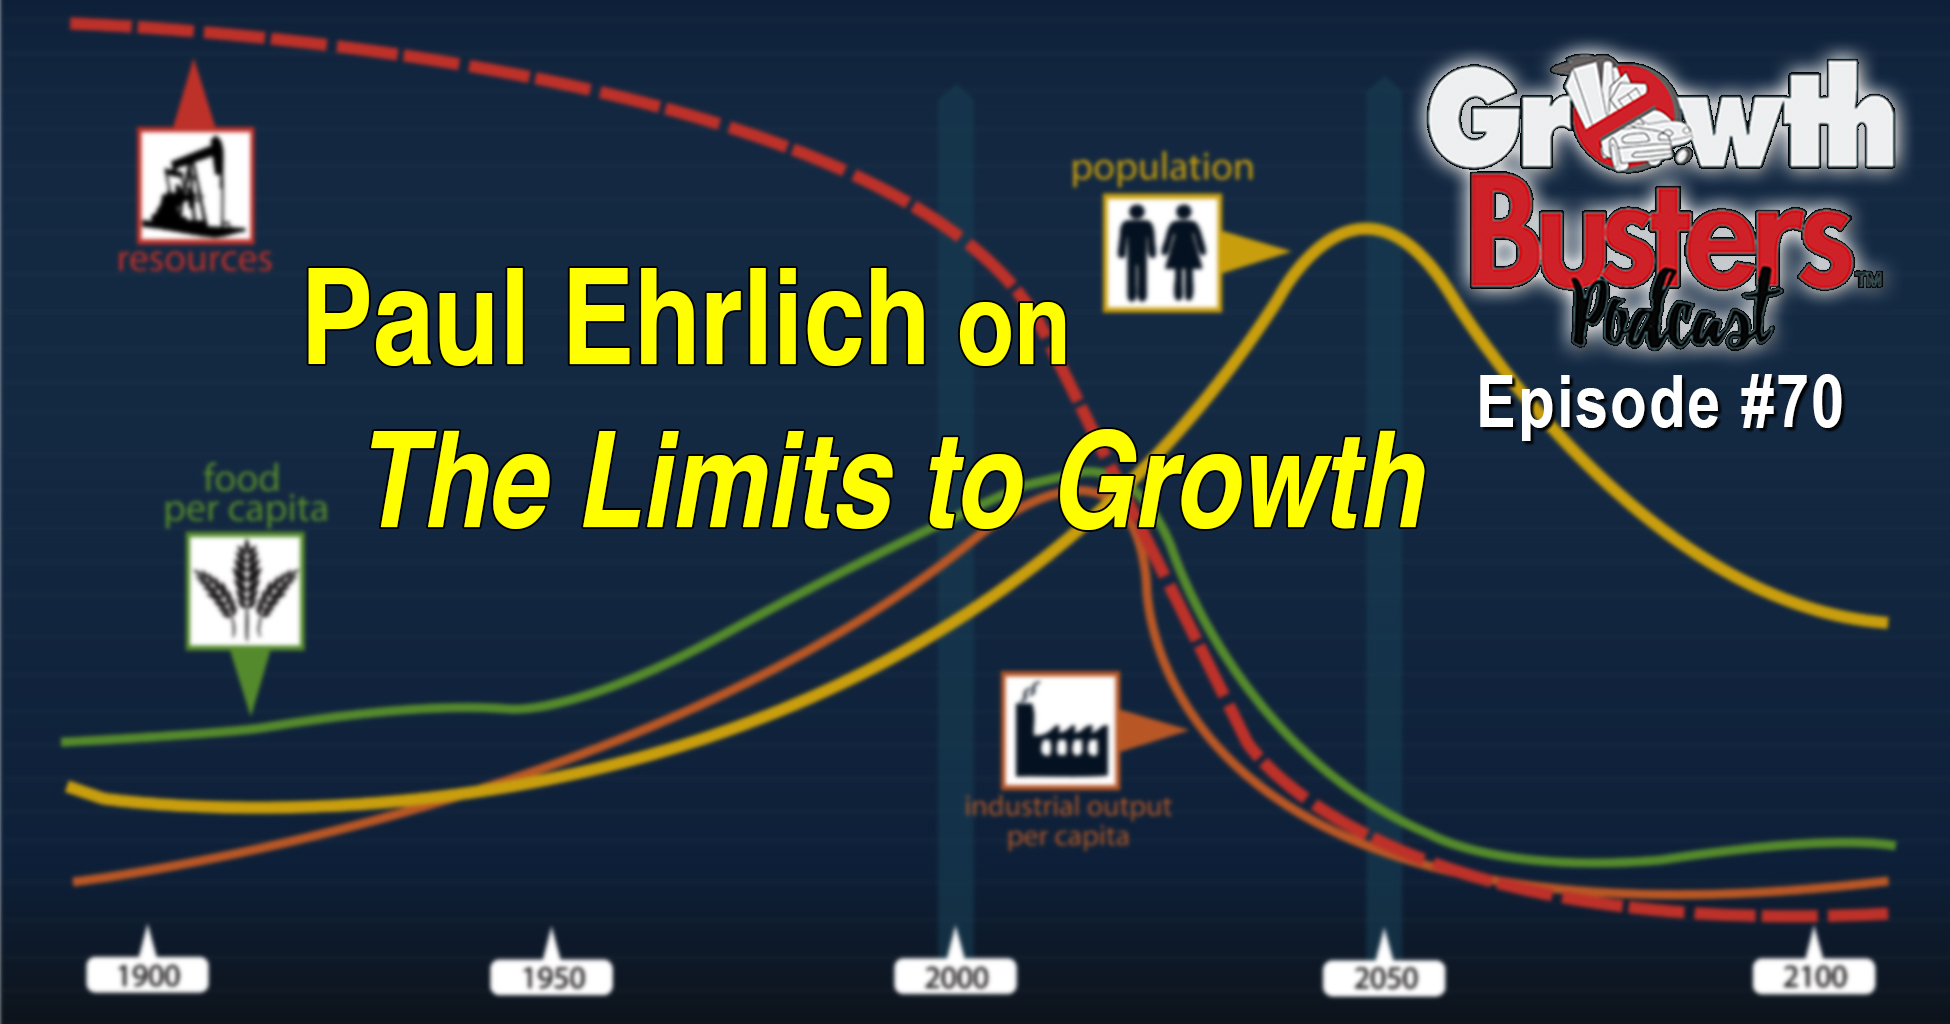 Paul Ehrlich on The Limits to Growth | GrowthBusters